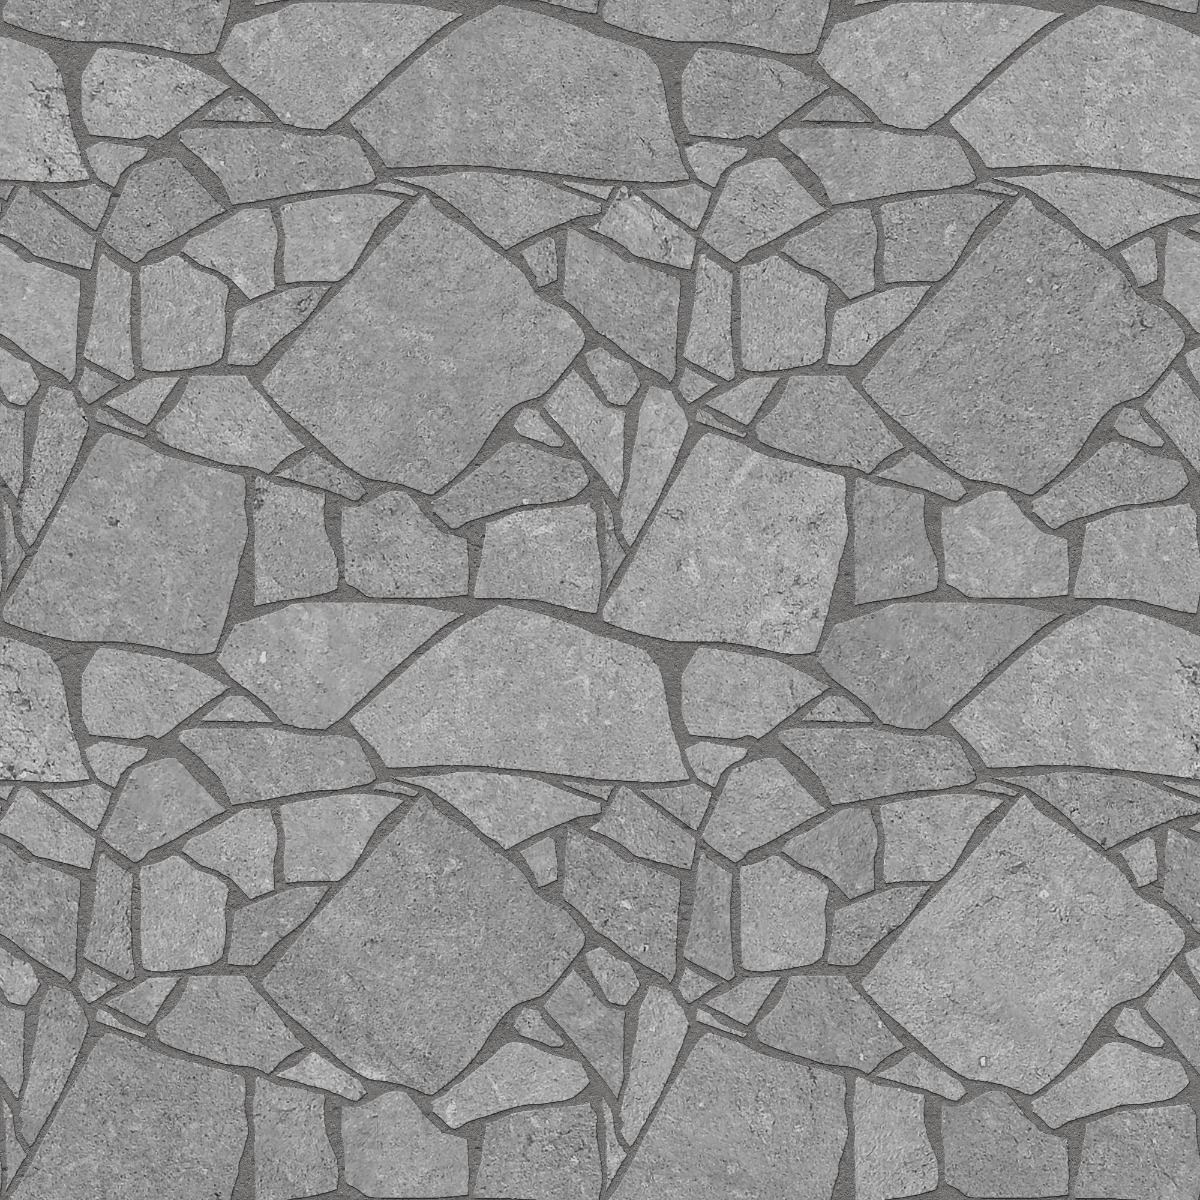 A seamless stone texture with reconstituted stone blocks arranged in a Crazy Paving pattern